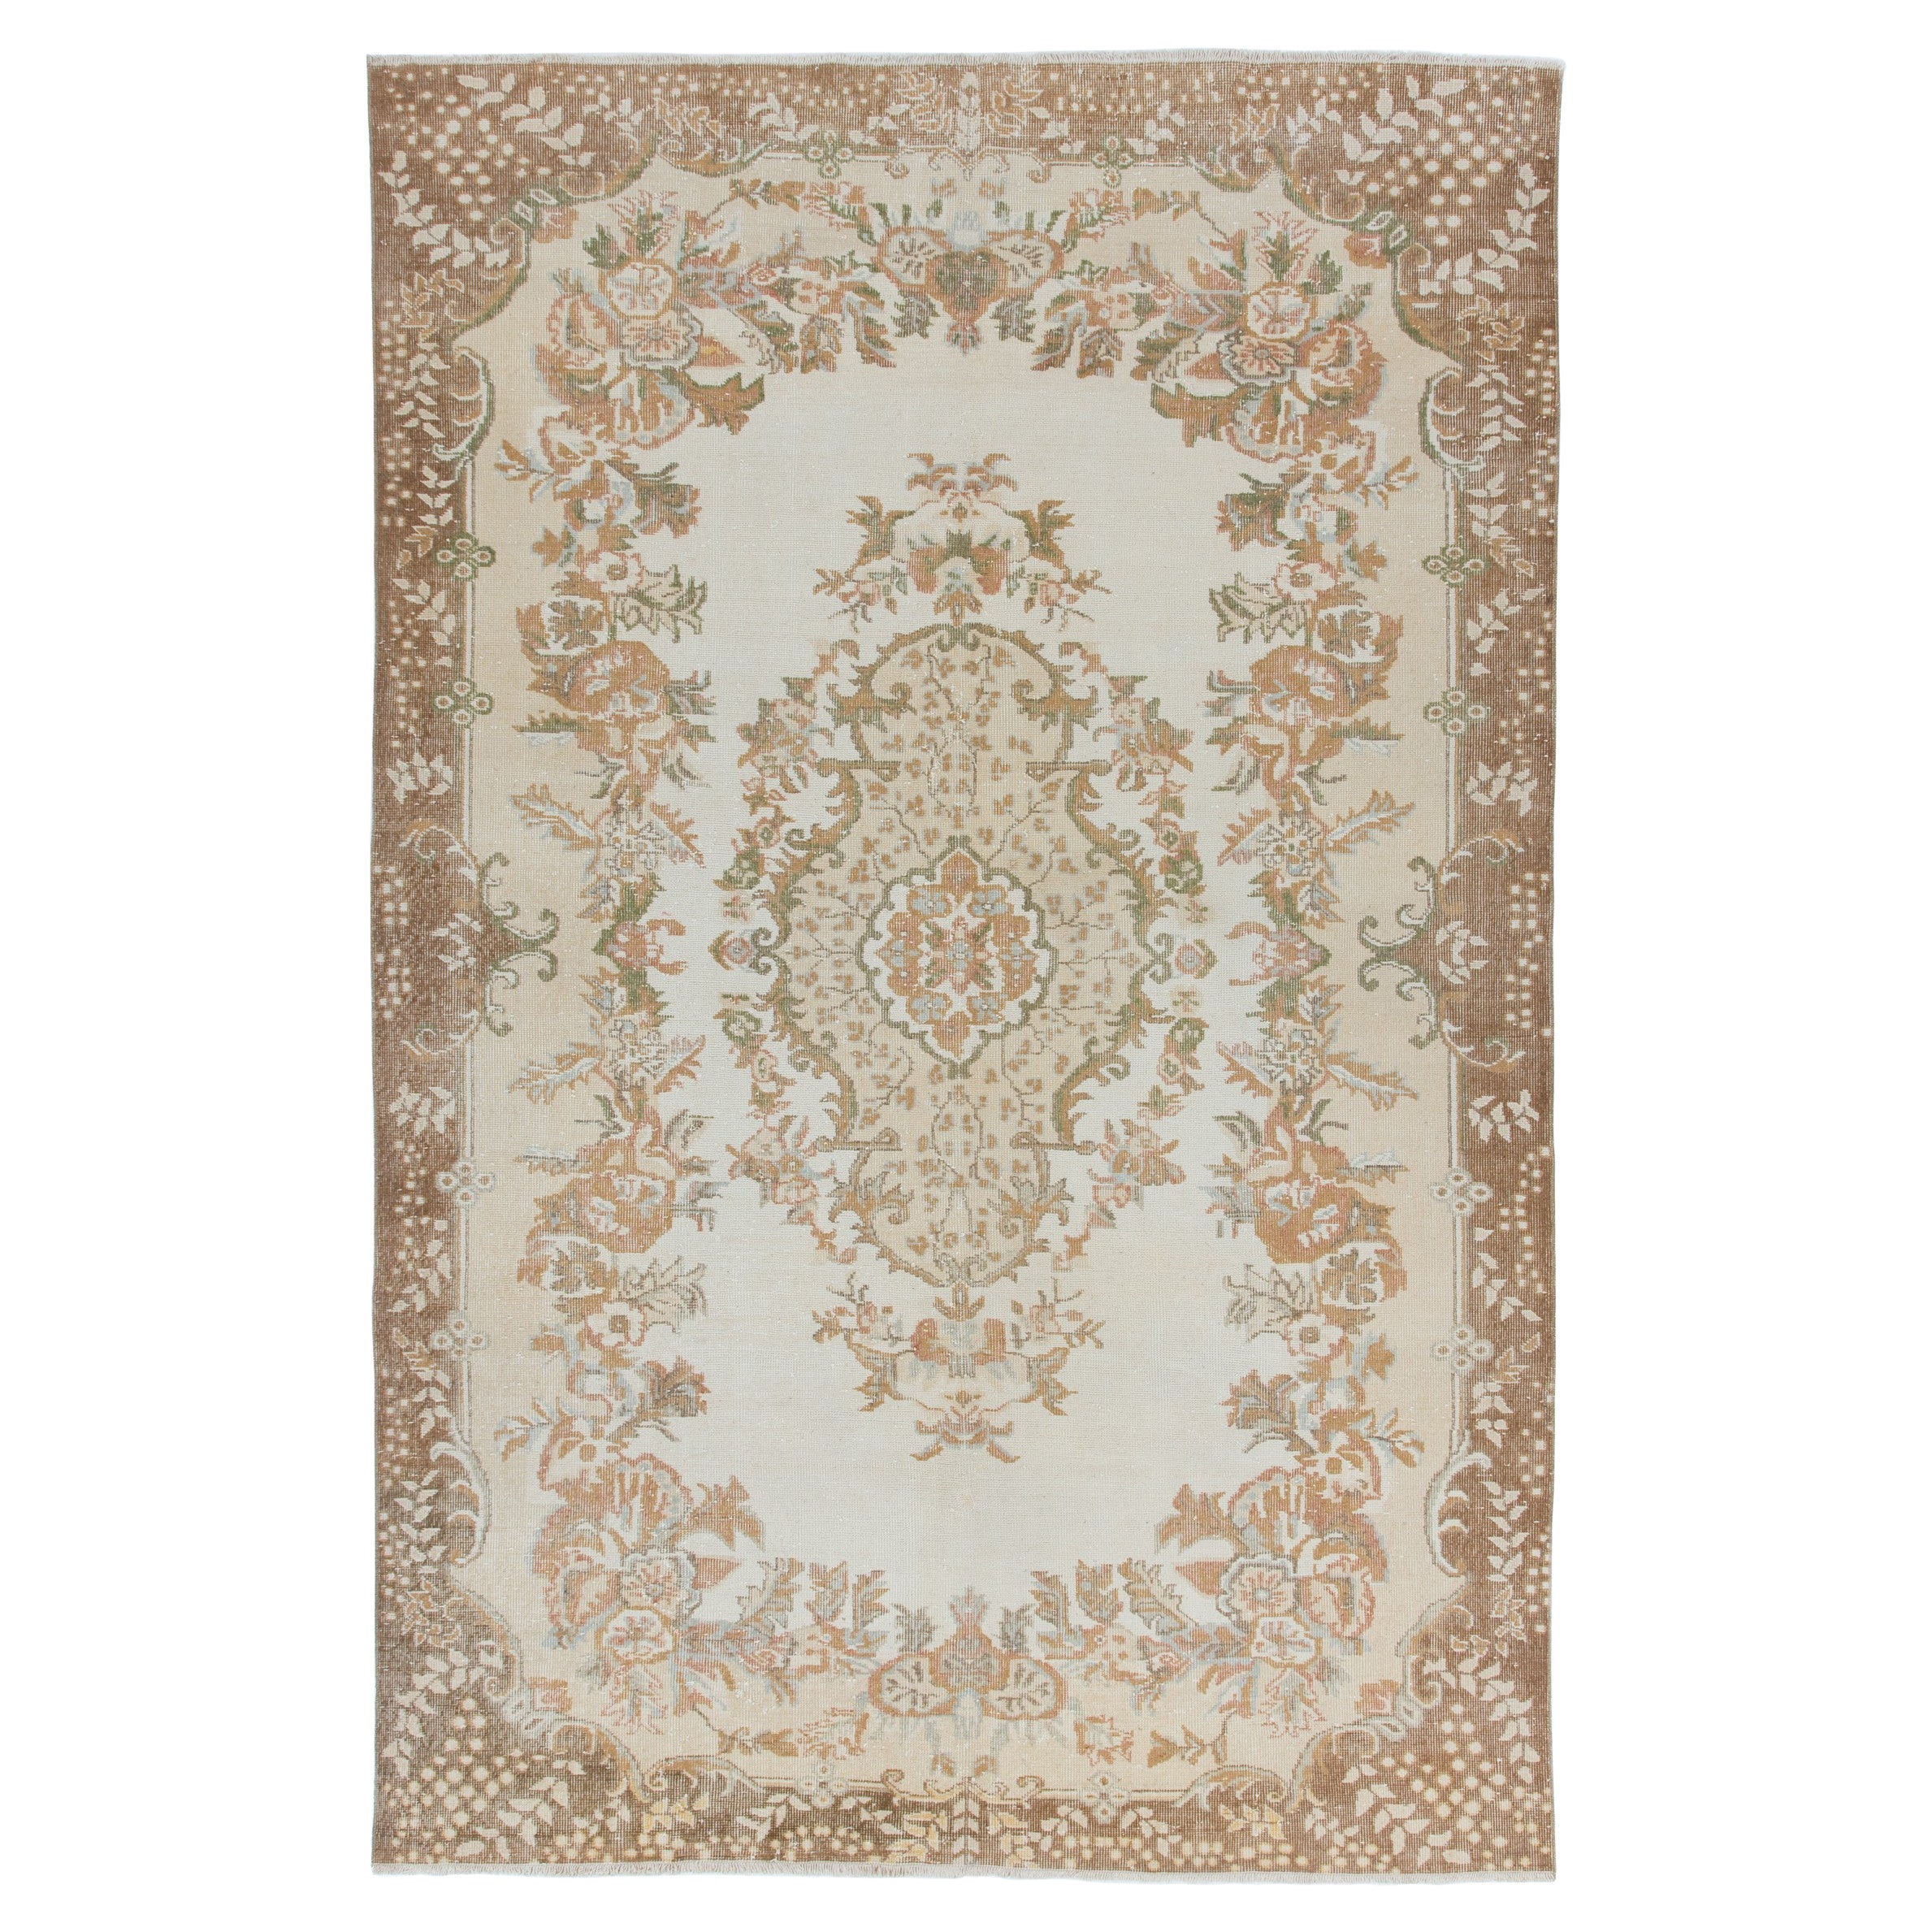 7x11 Ft Authentic Hand-Knotted Vintage Turkish Area Rug in Soft Colors For Sale